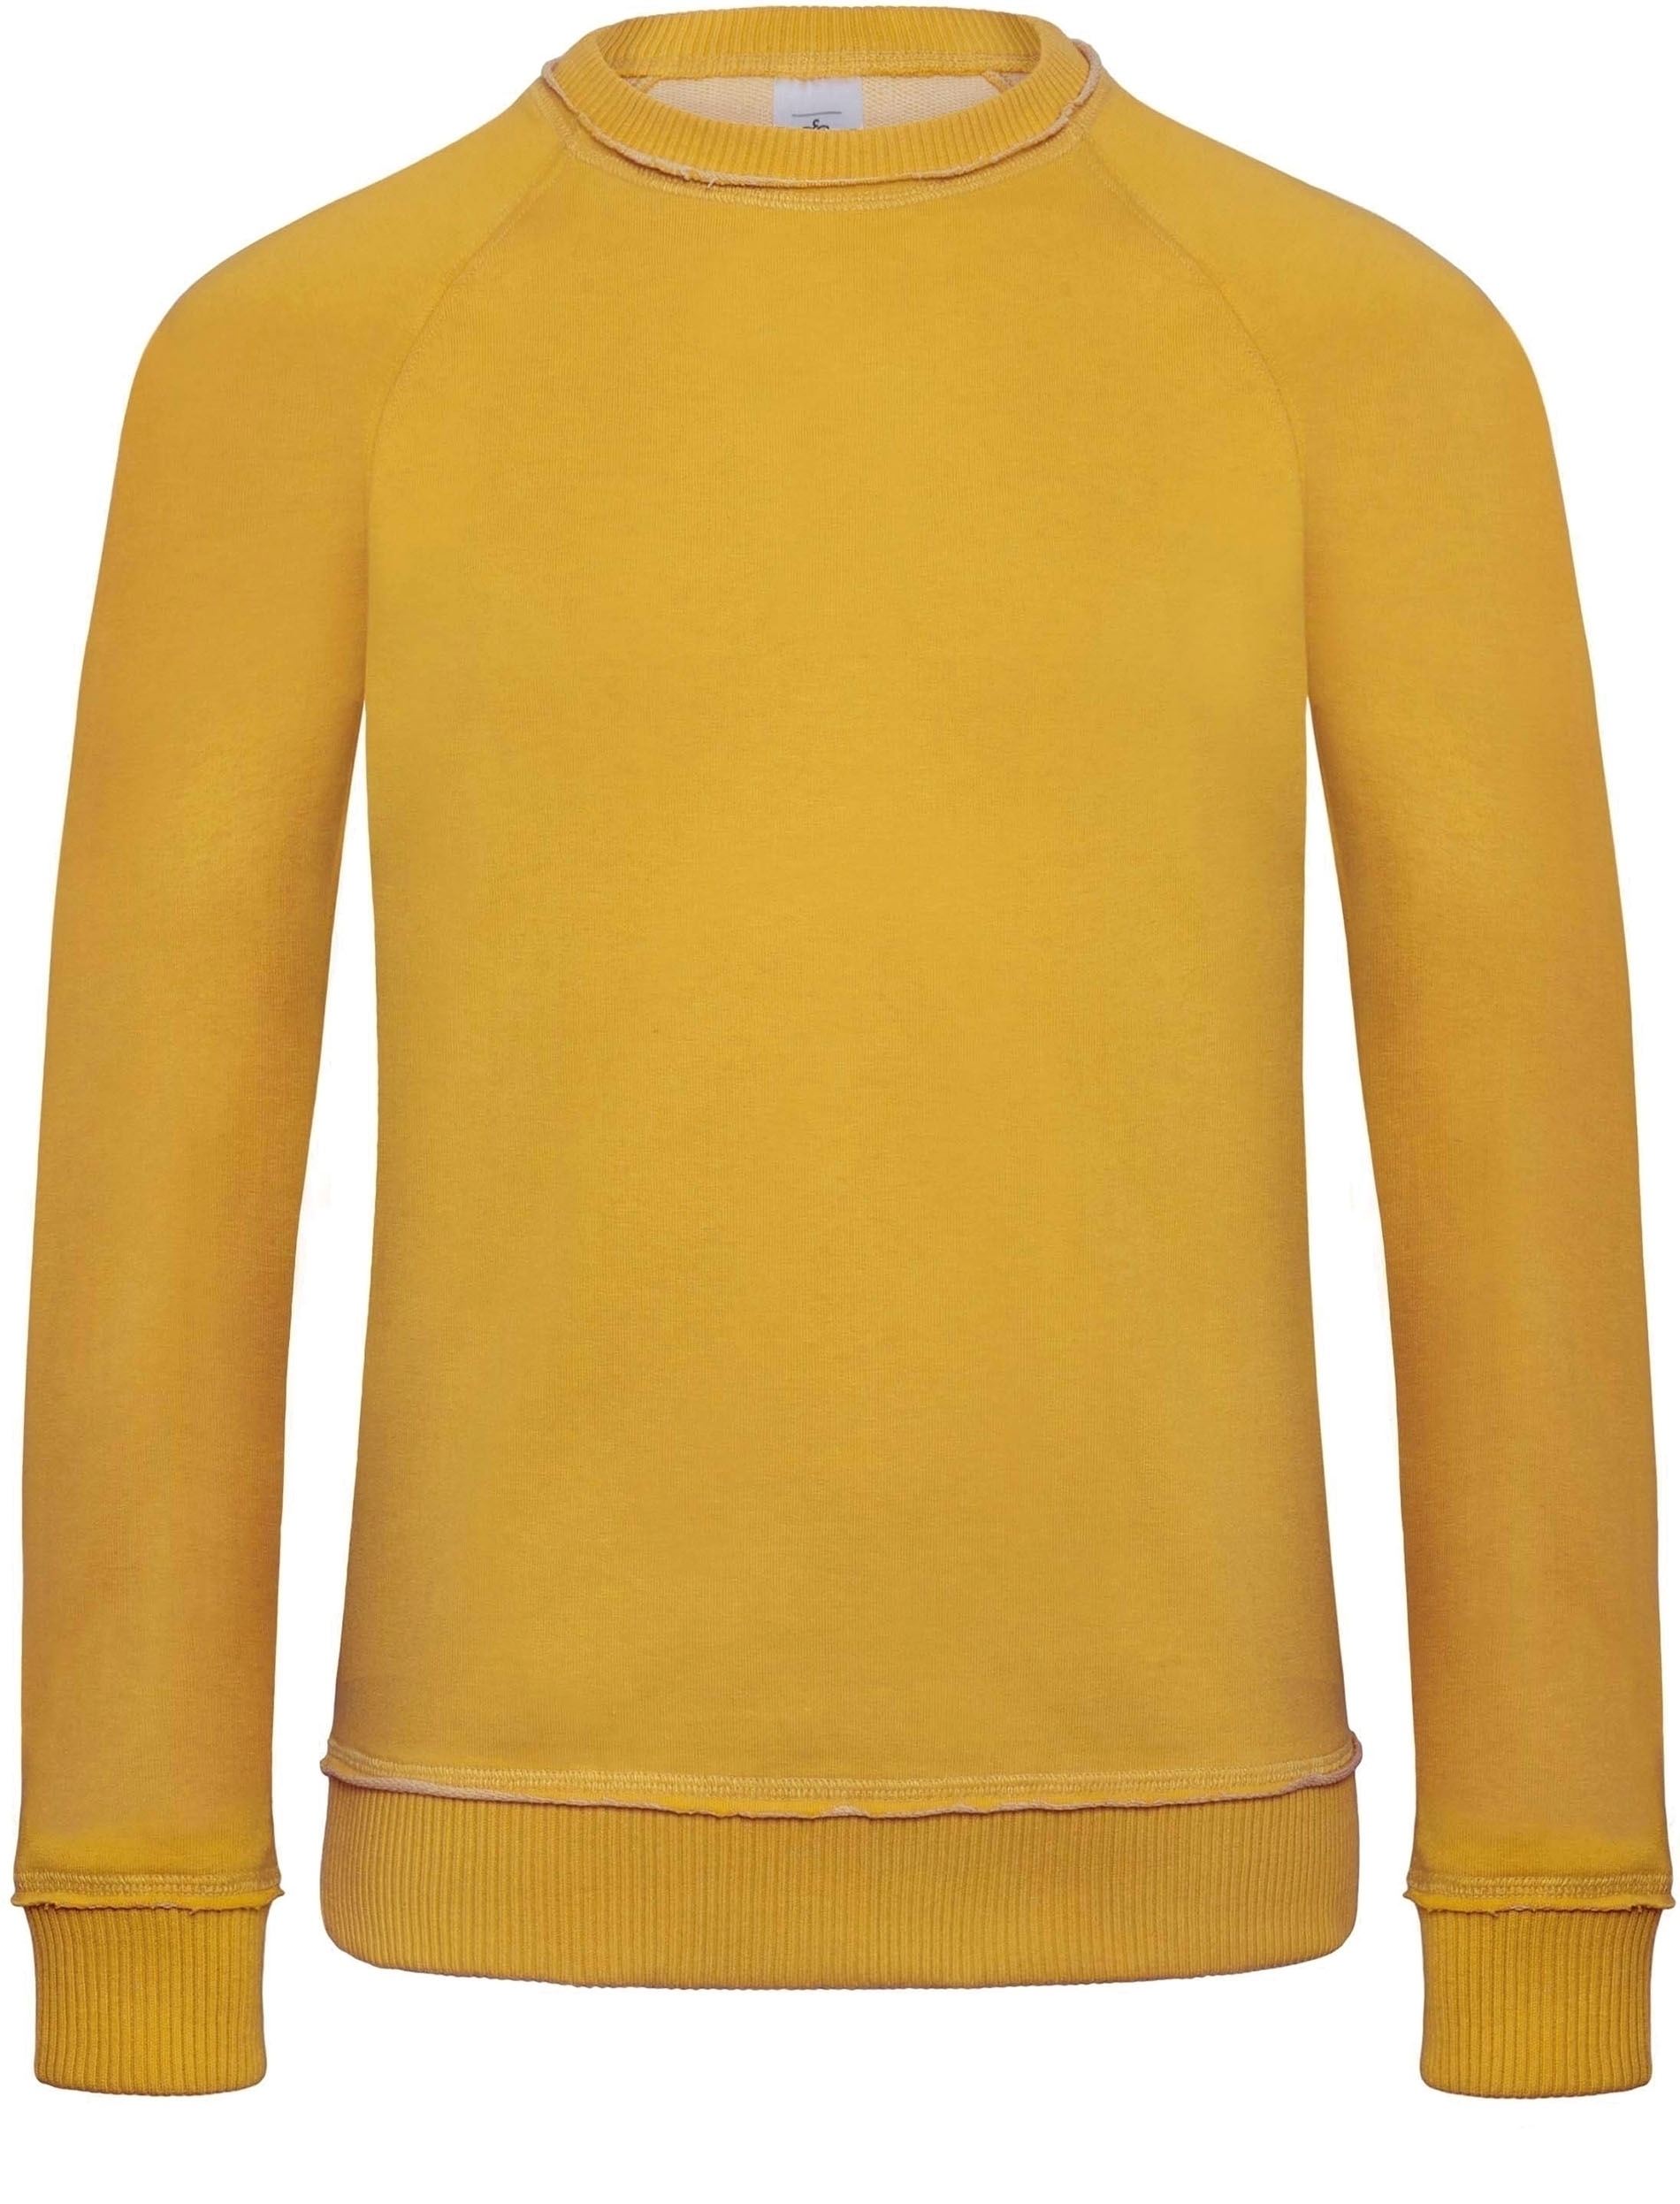 SWEAT-SHIRT DNM INVINCIBLE HOMME Used Gold jaune